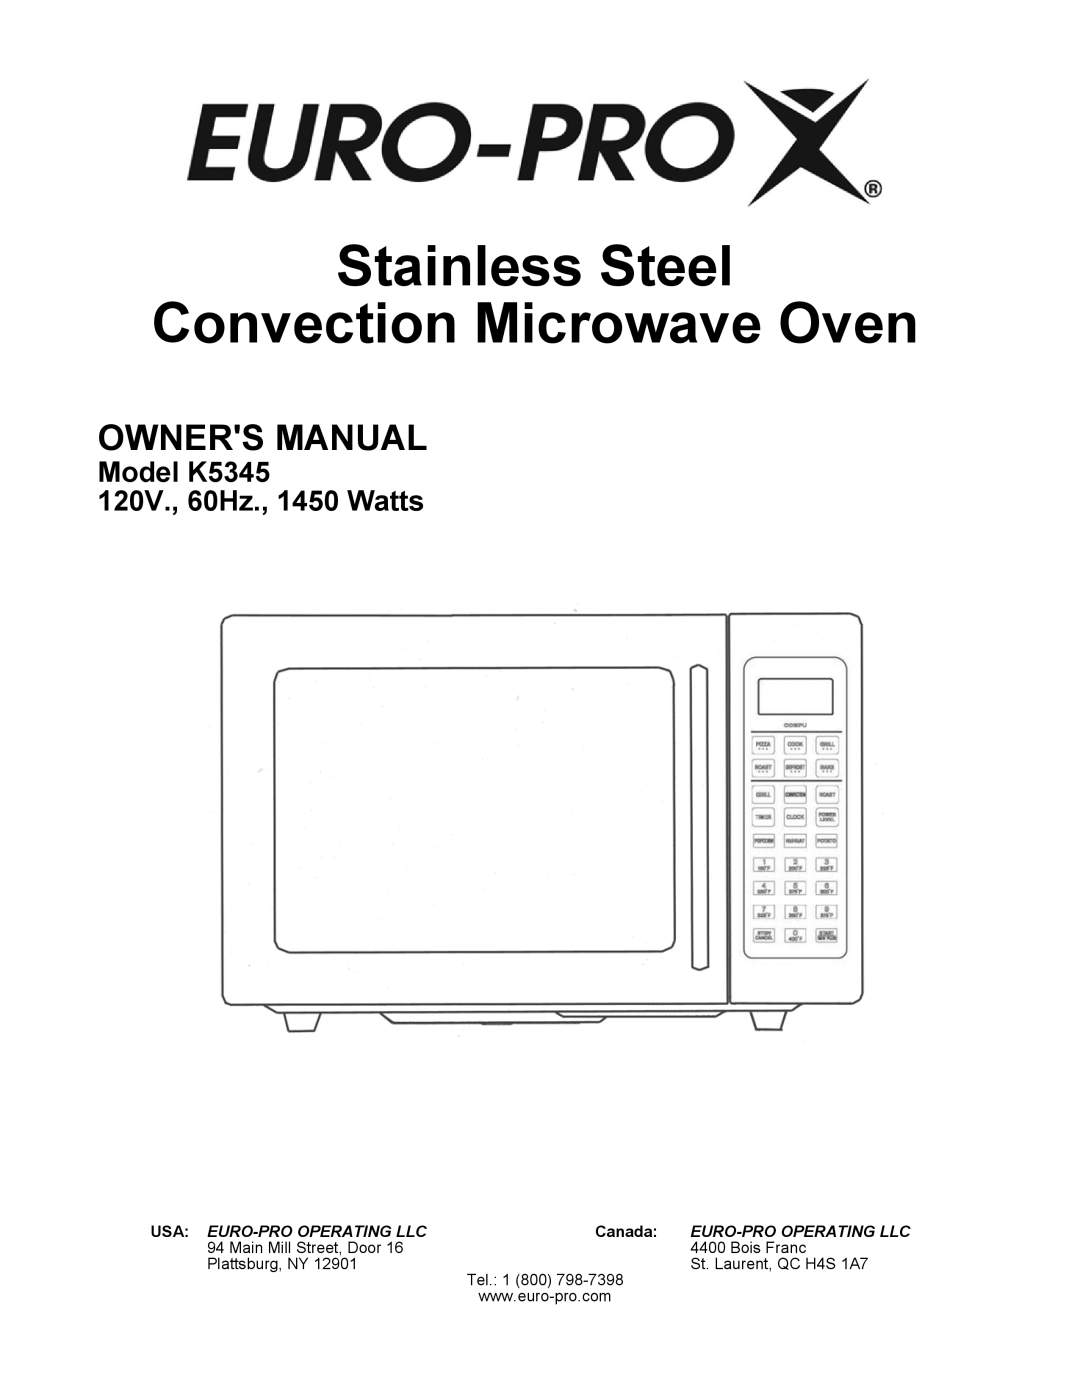 Euro-Pro owner manual Stainless Steel Convection Microwave Oven, Model K5345 120V., 60Hz., 1450 Watts, Bois Franc, Tel 